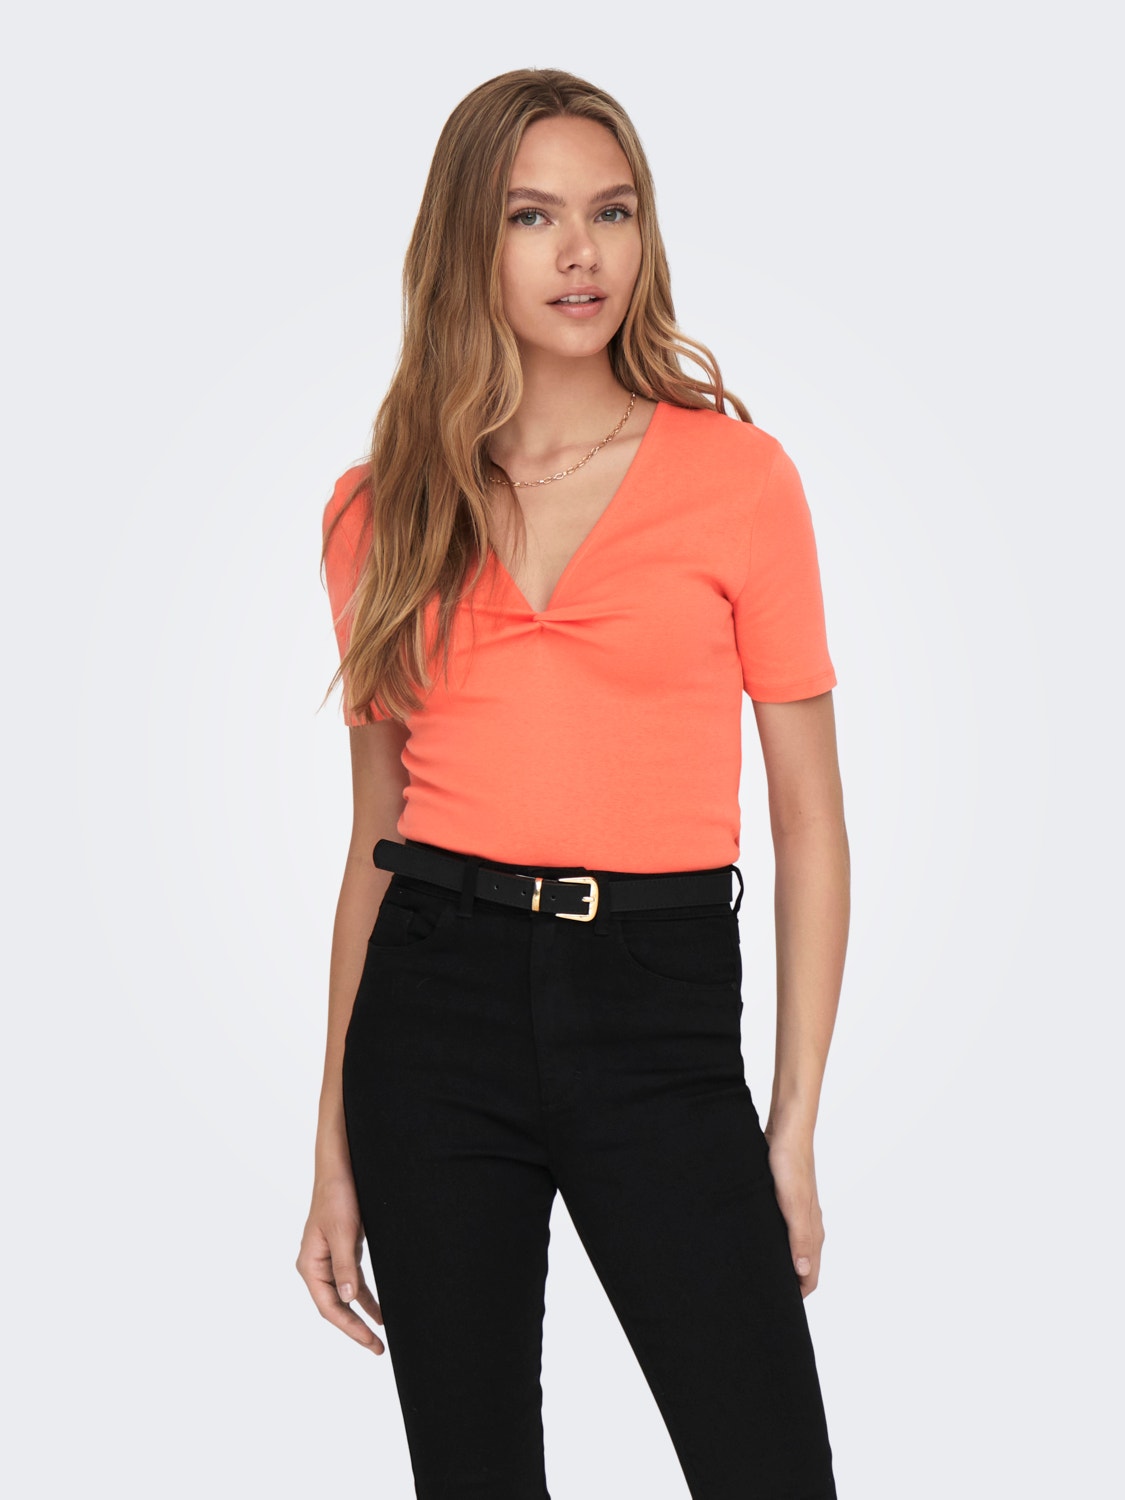 ONLY T-shirt Regular Fit Scollo a V -Living Coral - 15290782